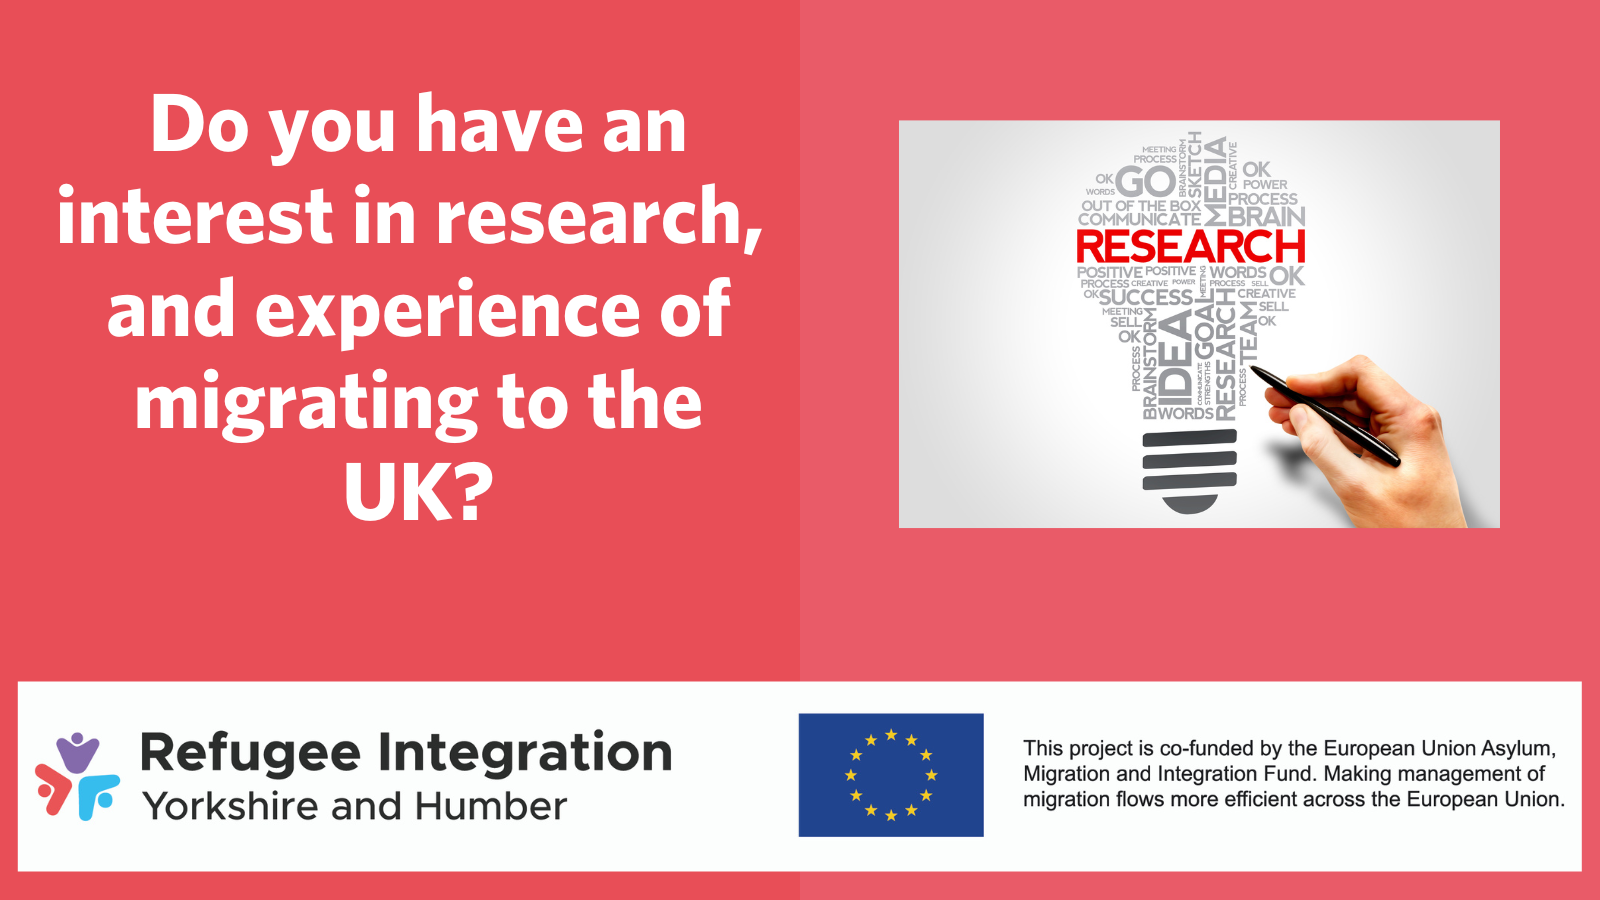 Slide with the text 'Do you have an interest in research, and experience of migrating to the UK?', and image of a lightbulb made up of words, with 'research' as the most prominent, and the Refugee Integration Yorkshire and Humber and European UnionAsylum Migration and Integration Fund logos.